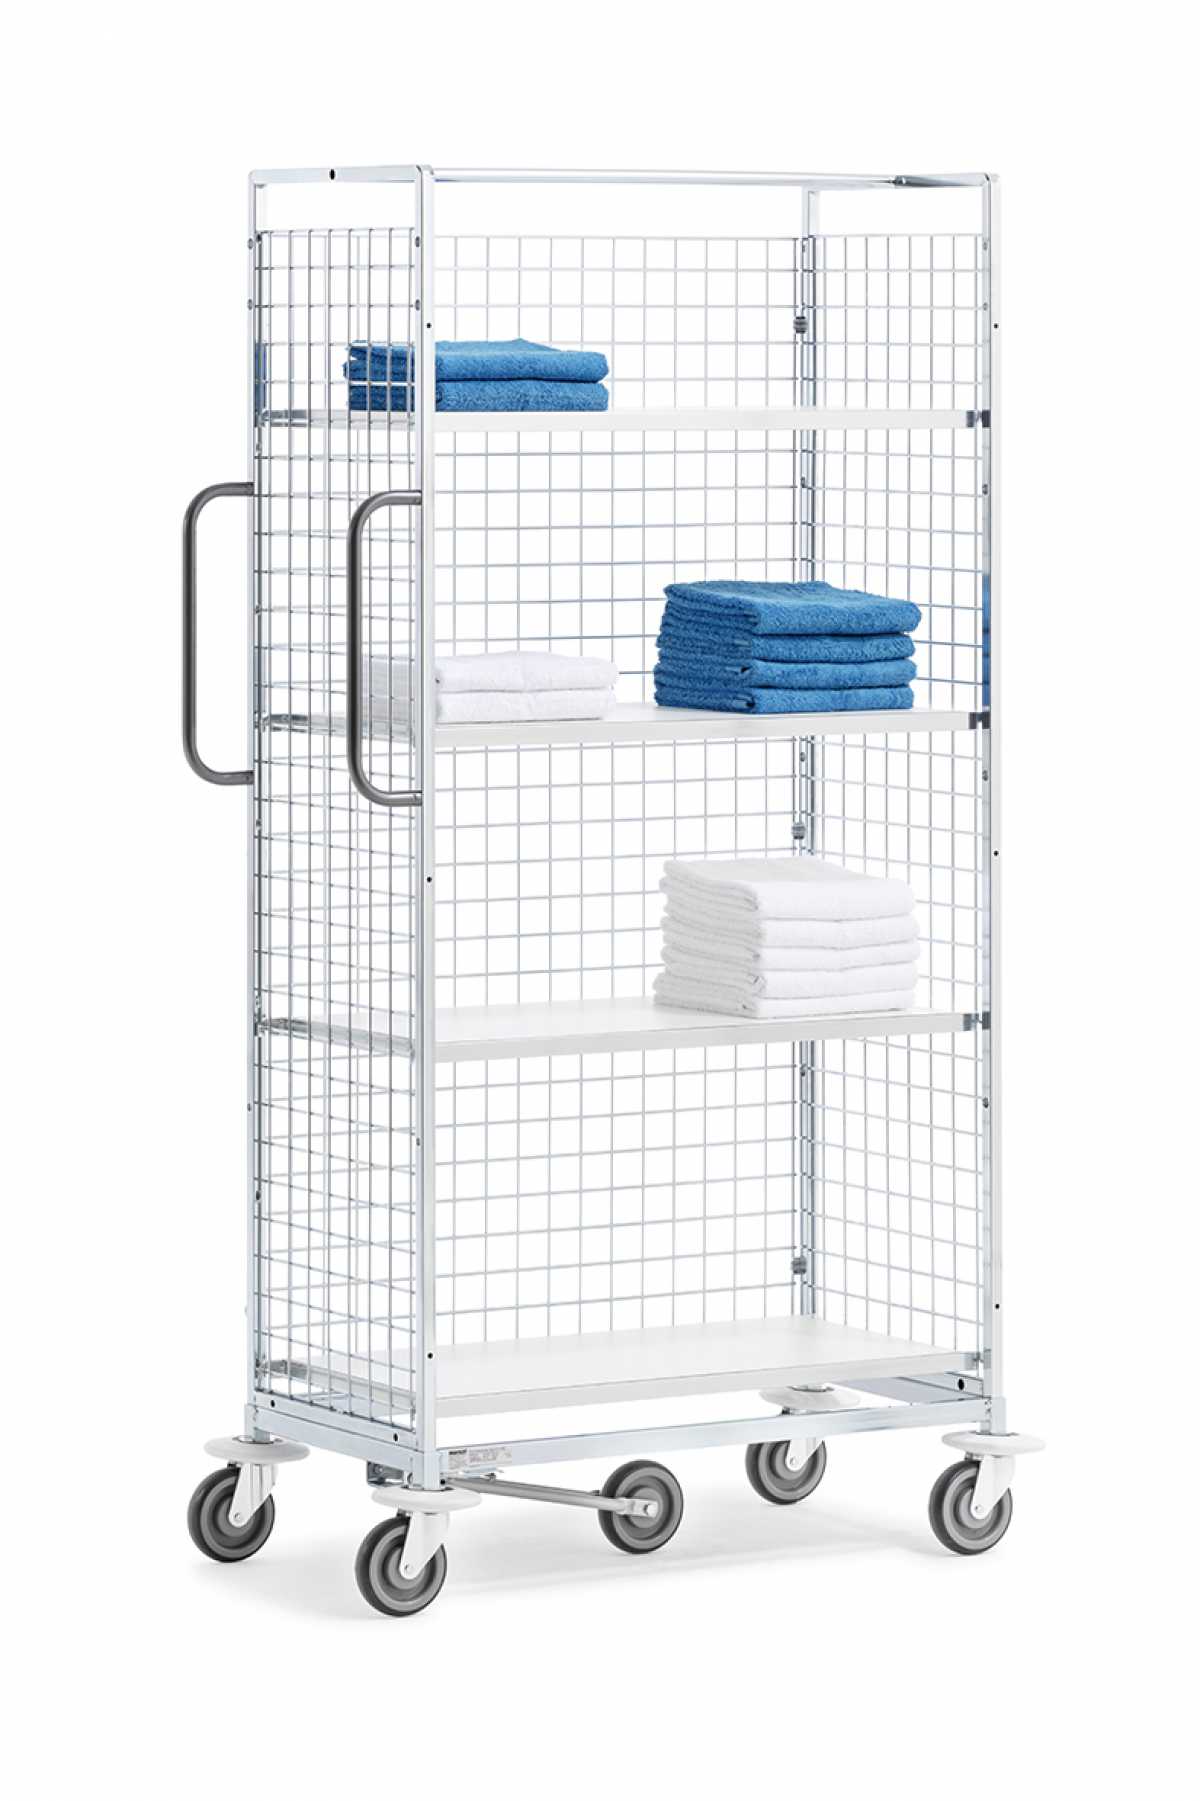 WANZL KT3 Shelved Laundry Trolley